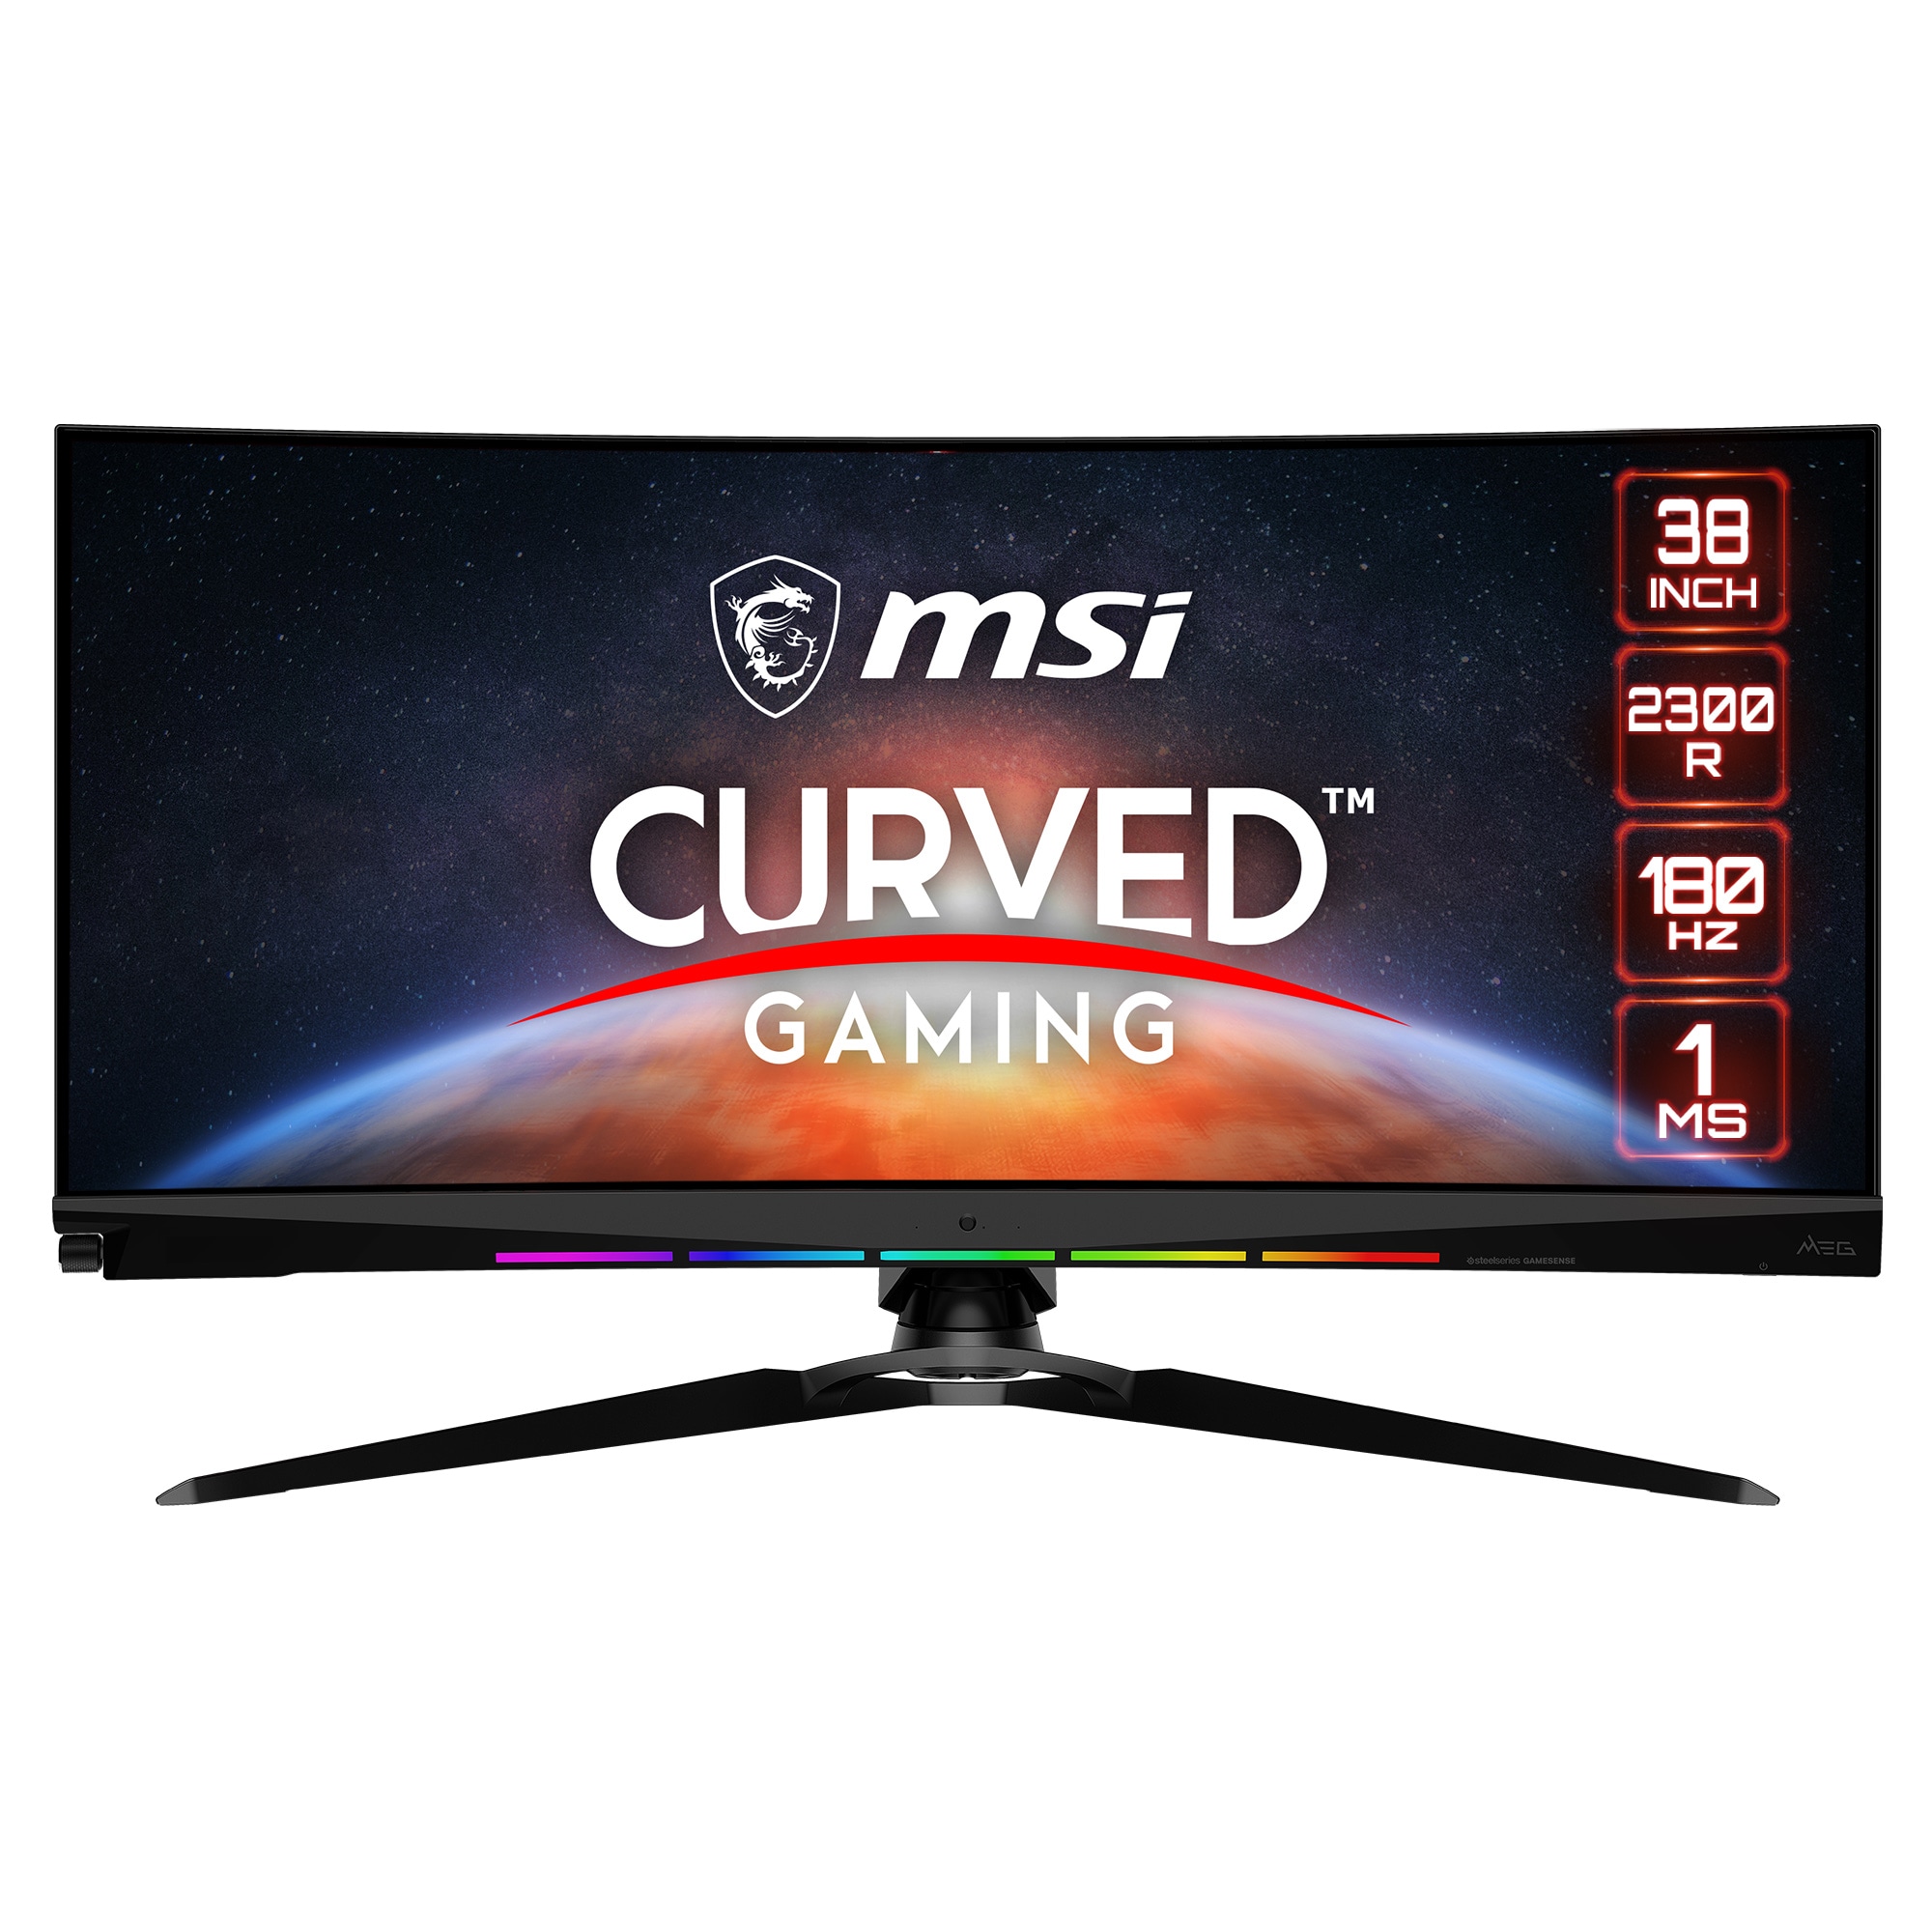 MSI Curved-Gaming-LED-Monitor »Optix MEG381CQRDE Plus«, 95,25 cm/37,5 Zoll, 3840 x 1600 px, UWQHD+, 1 ms Reaktionszeit, 175 Hz, G-Sync Ultimate, Rapid IPS, HDR600, 21:9 Ultrawide